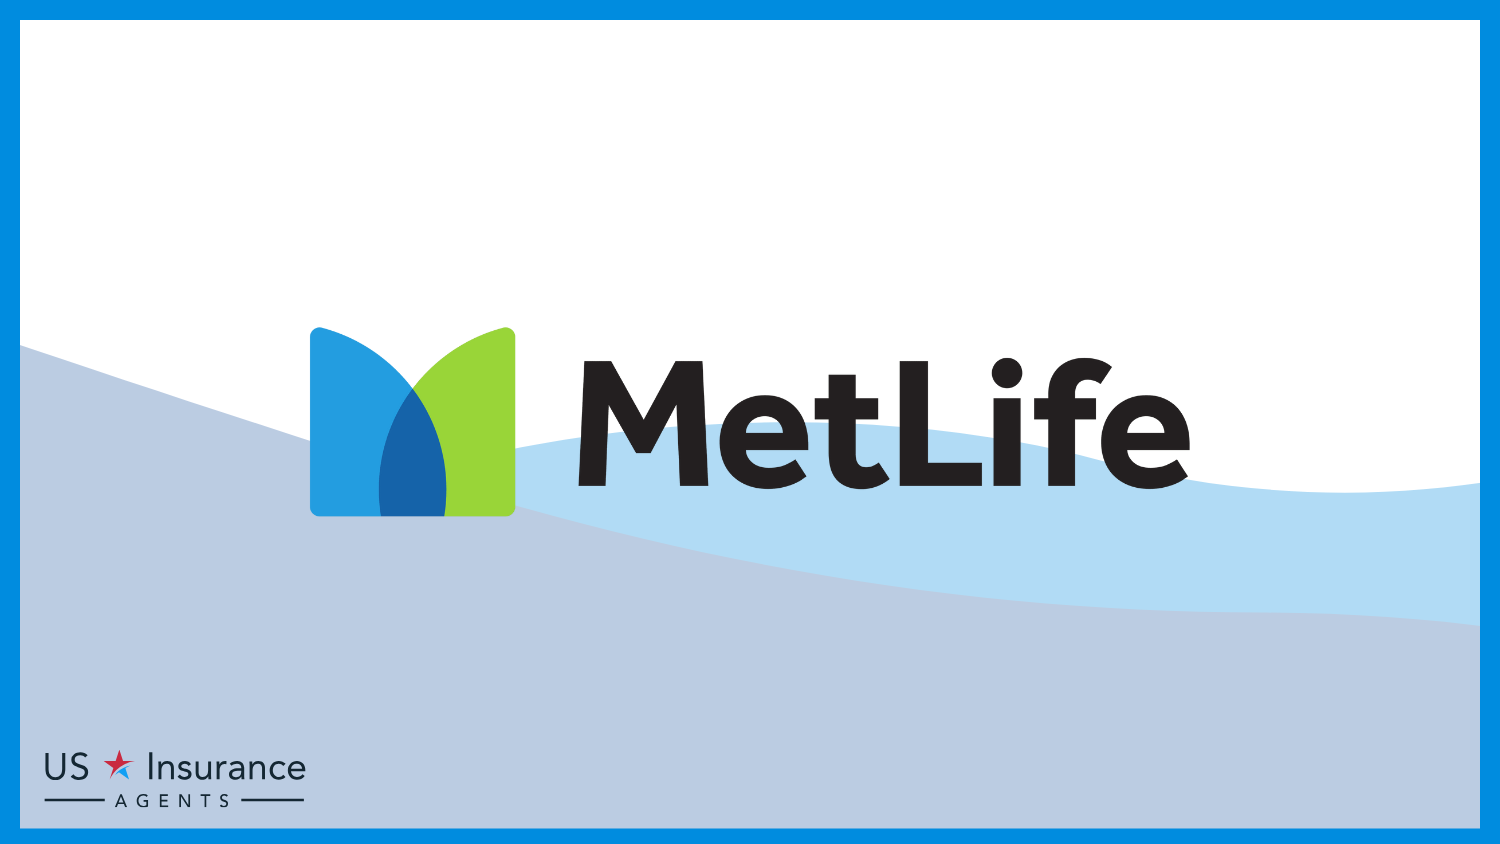 Metlife : Best Car Insurance for Undocumented Immigrants